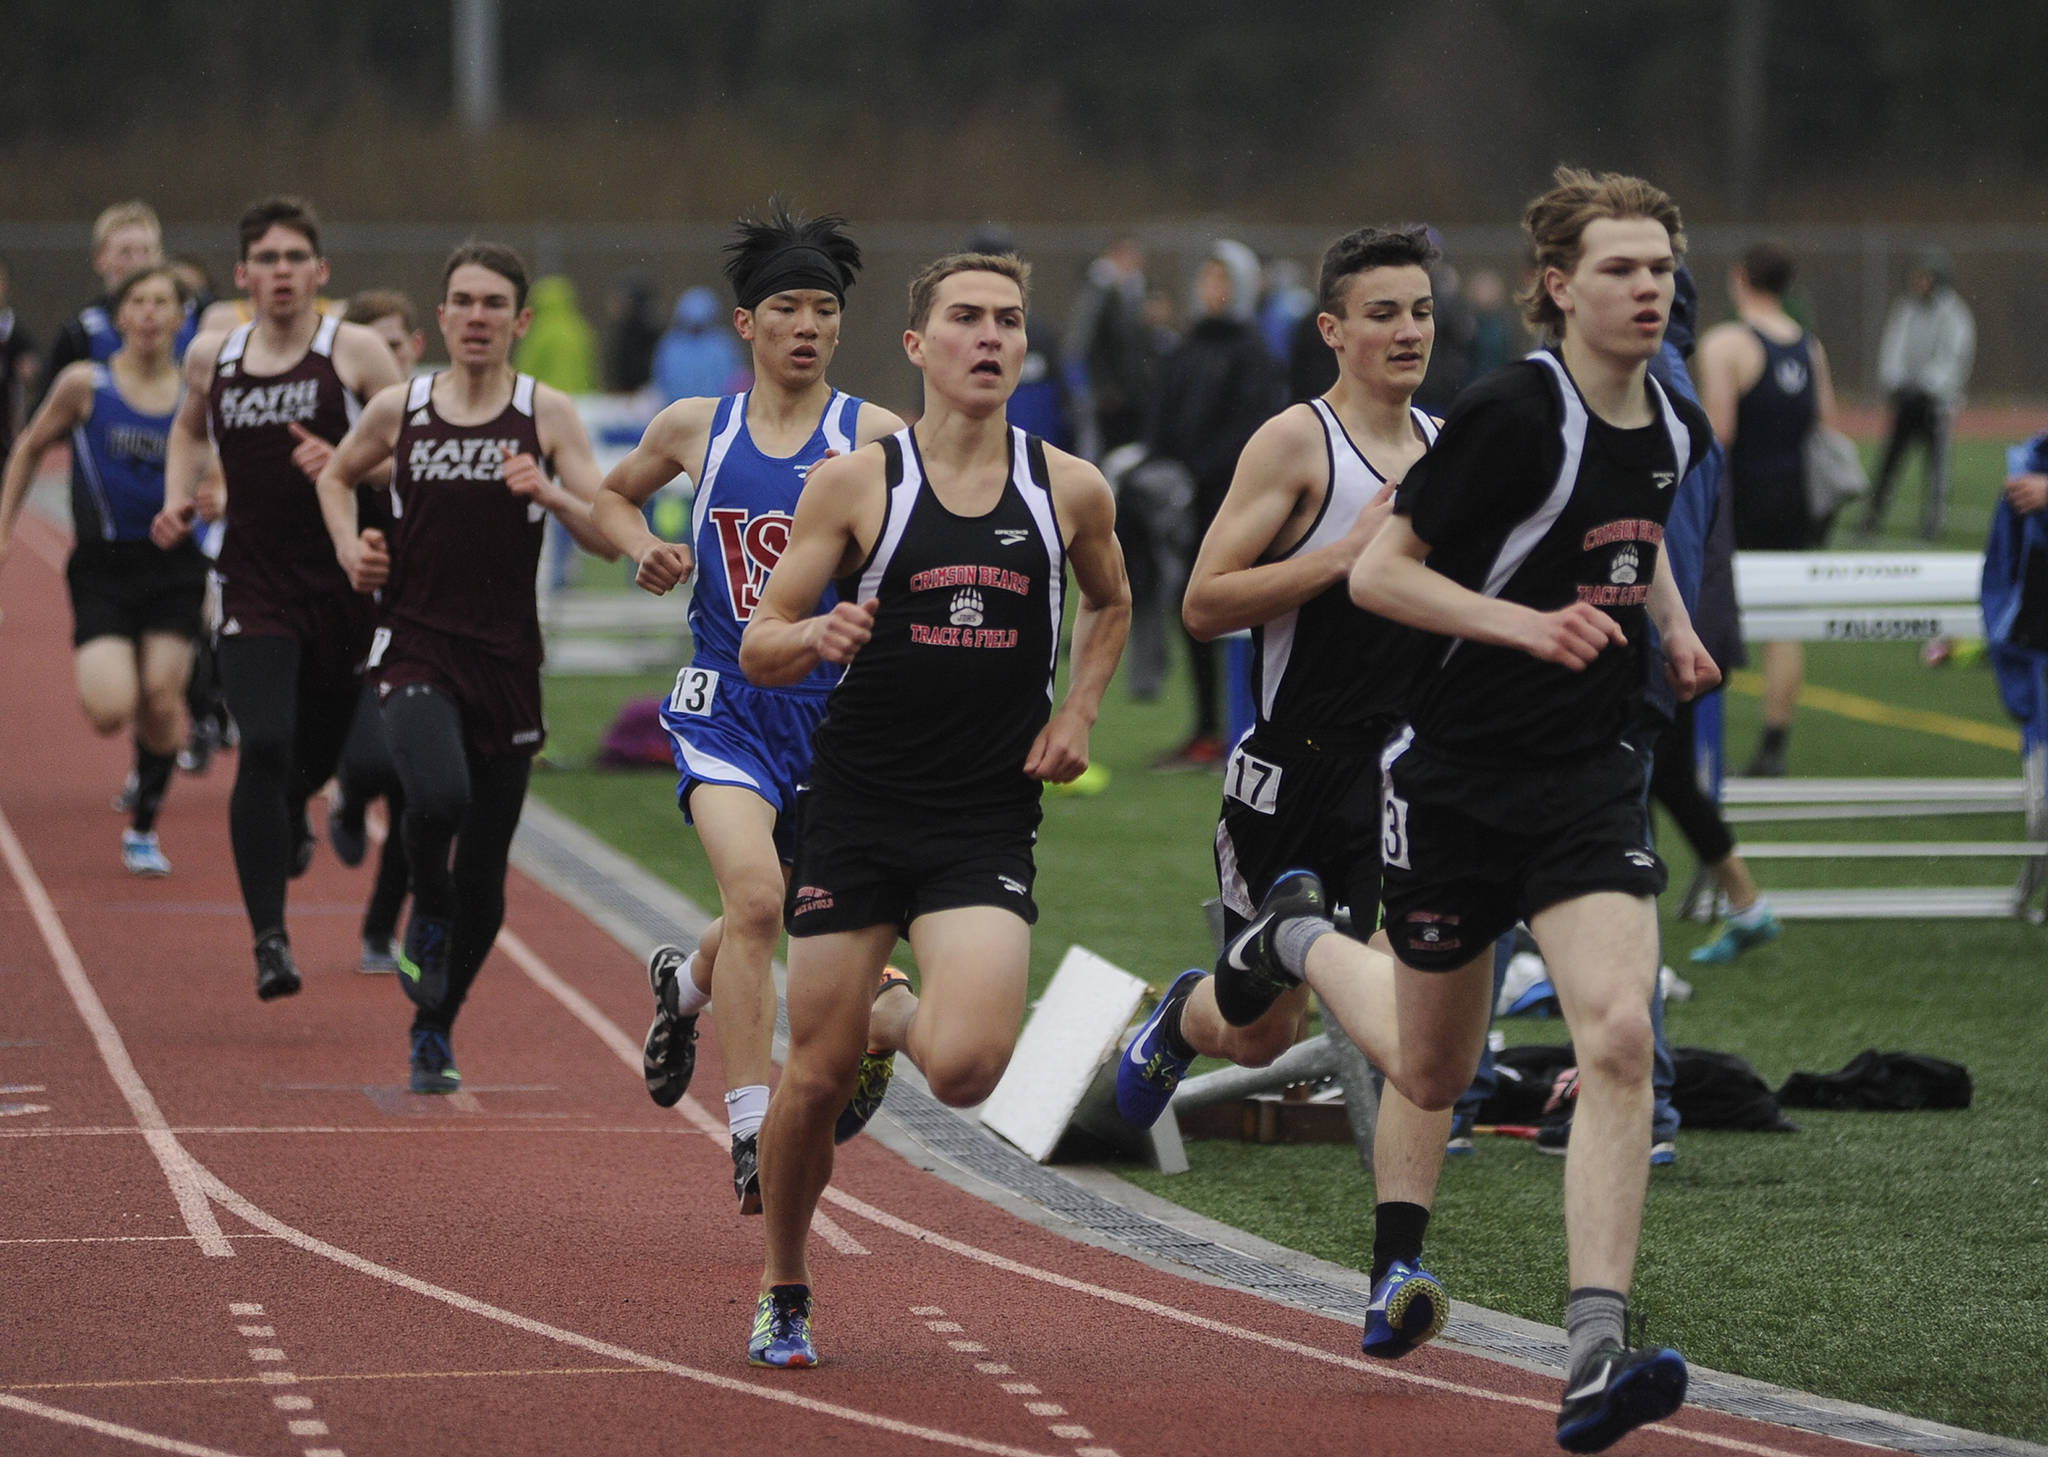 Juneau-Douglas High School senior Tim McKenna, third from right, and junior Dalton Hoy, far right, round the second turn in the 800-meter run on Friday at the Capital Invitational track and field meet at TMHS. (Richard McGrail | Juneau Empire)